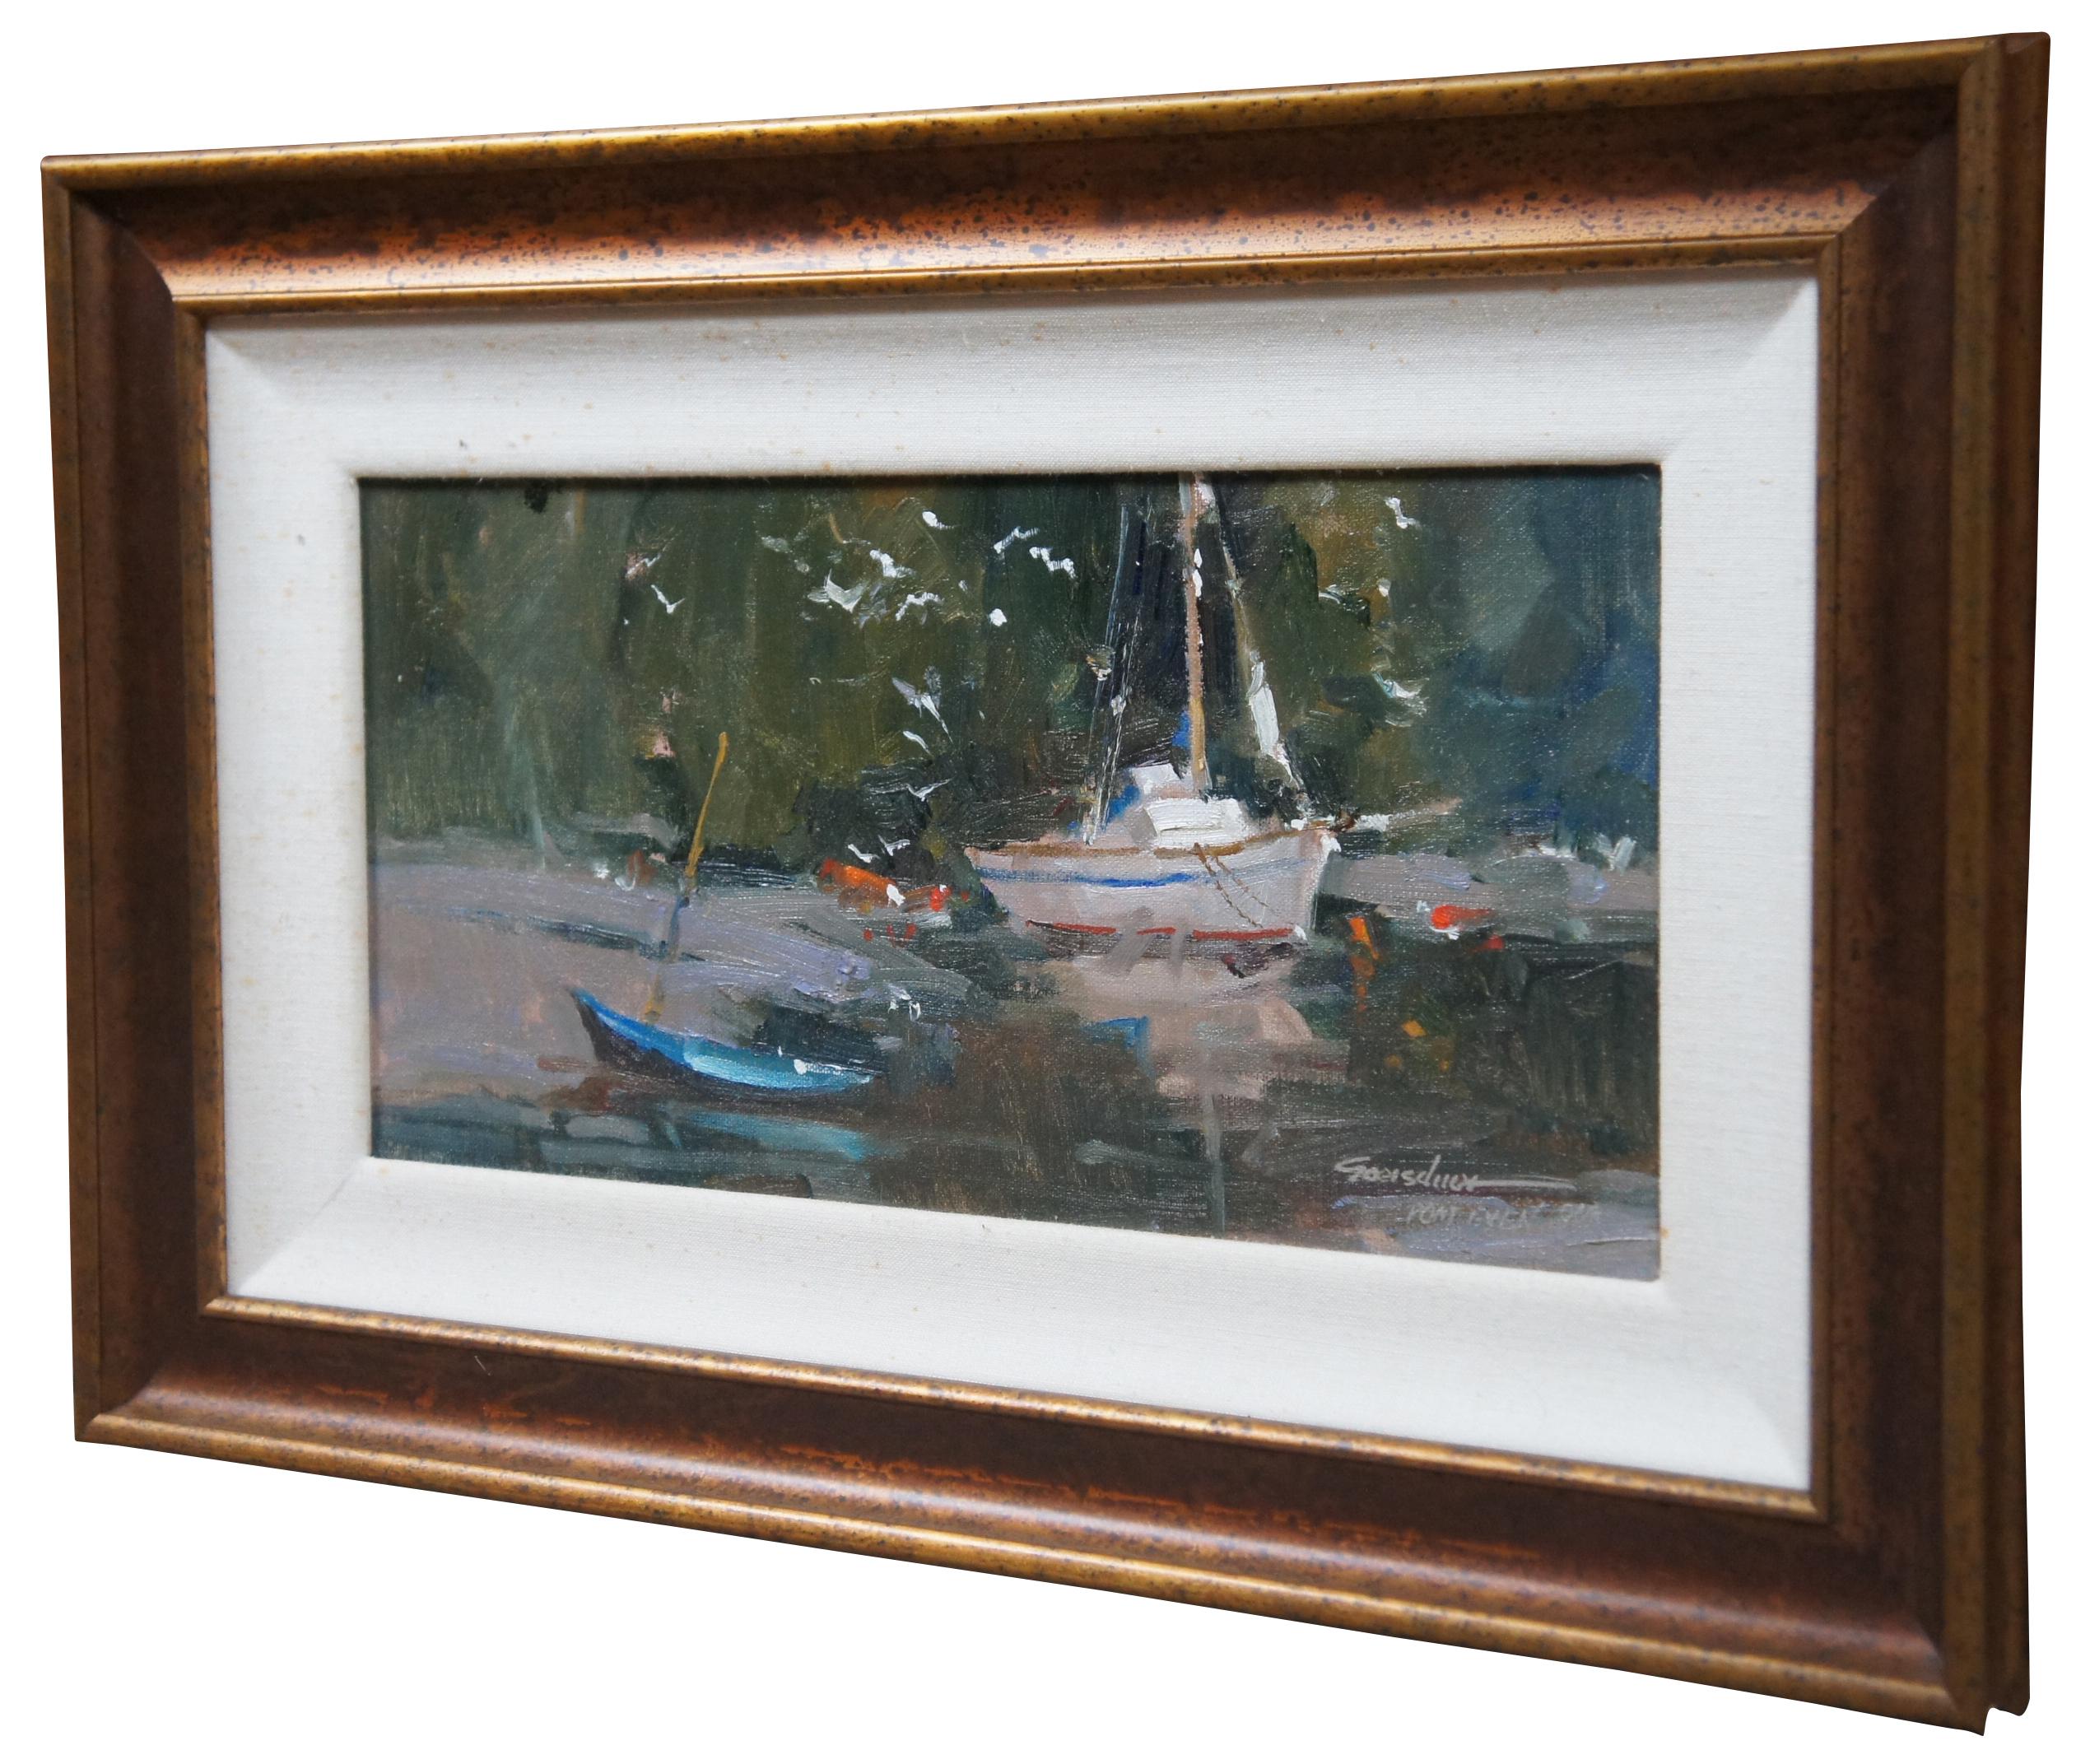 Vintage original signed impressionist nautical seascape or riverscape oil painting on board painting featuring several sailboats near Chatterbox Falls in British Columbia. Chatterbox Falls is a waterfall in British Columbia, Canada, located at the